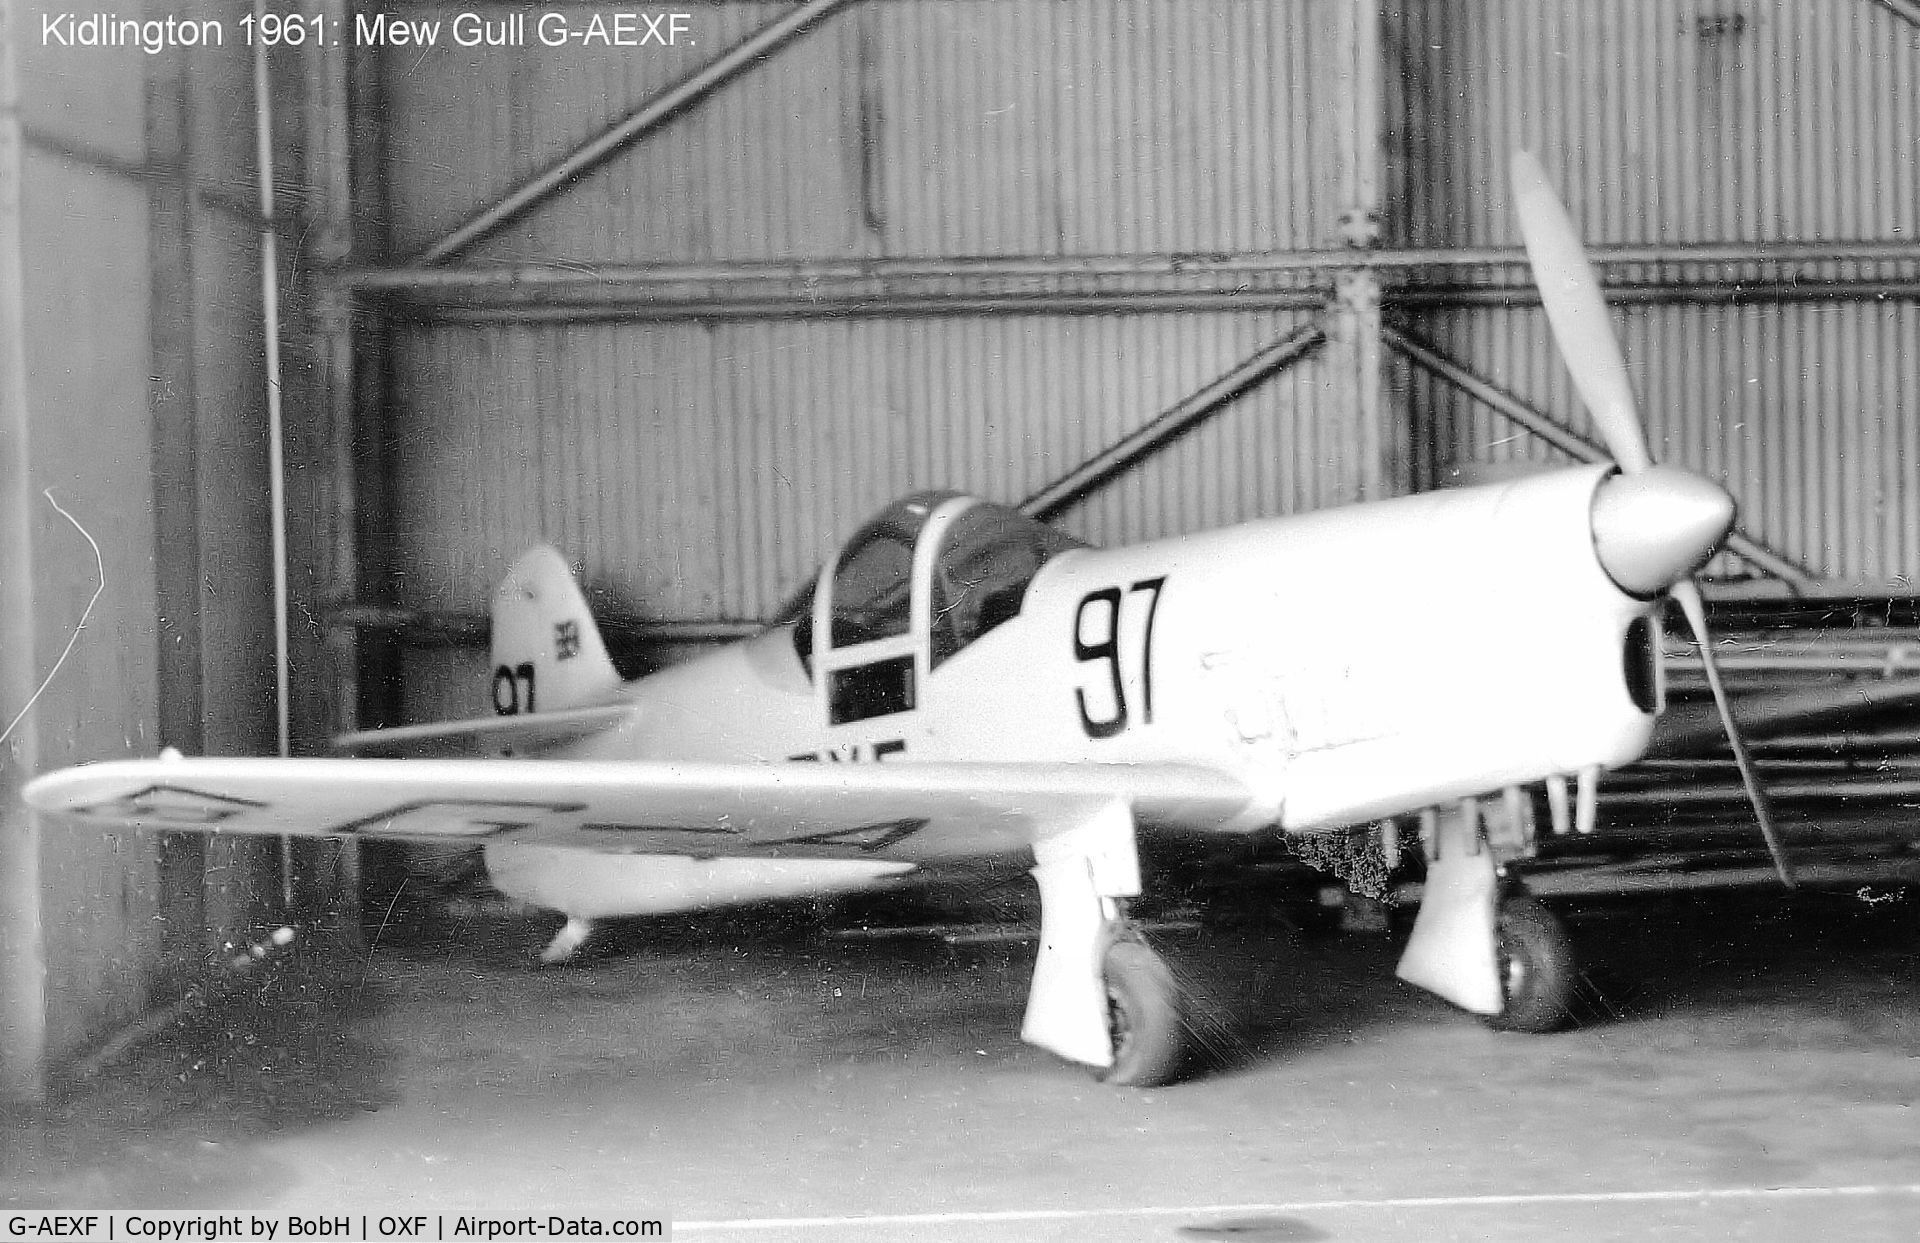 G-AEXF, 1936 Percival E-2H Mew Gull C/N E22, Taken in March 1961 at Kidlington. This was before it's rebuild in 1975. Compare it to the later pictures here and note differences to the wheel spats and the cockpit height (this mod was done for visibility but slowed the aircraft by over 20MPH)